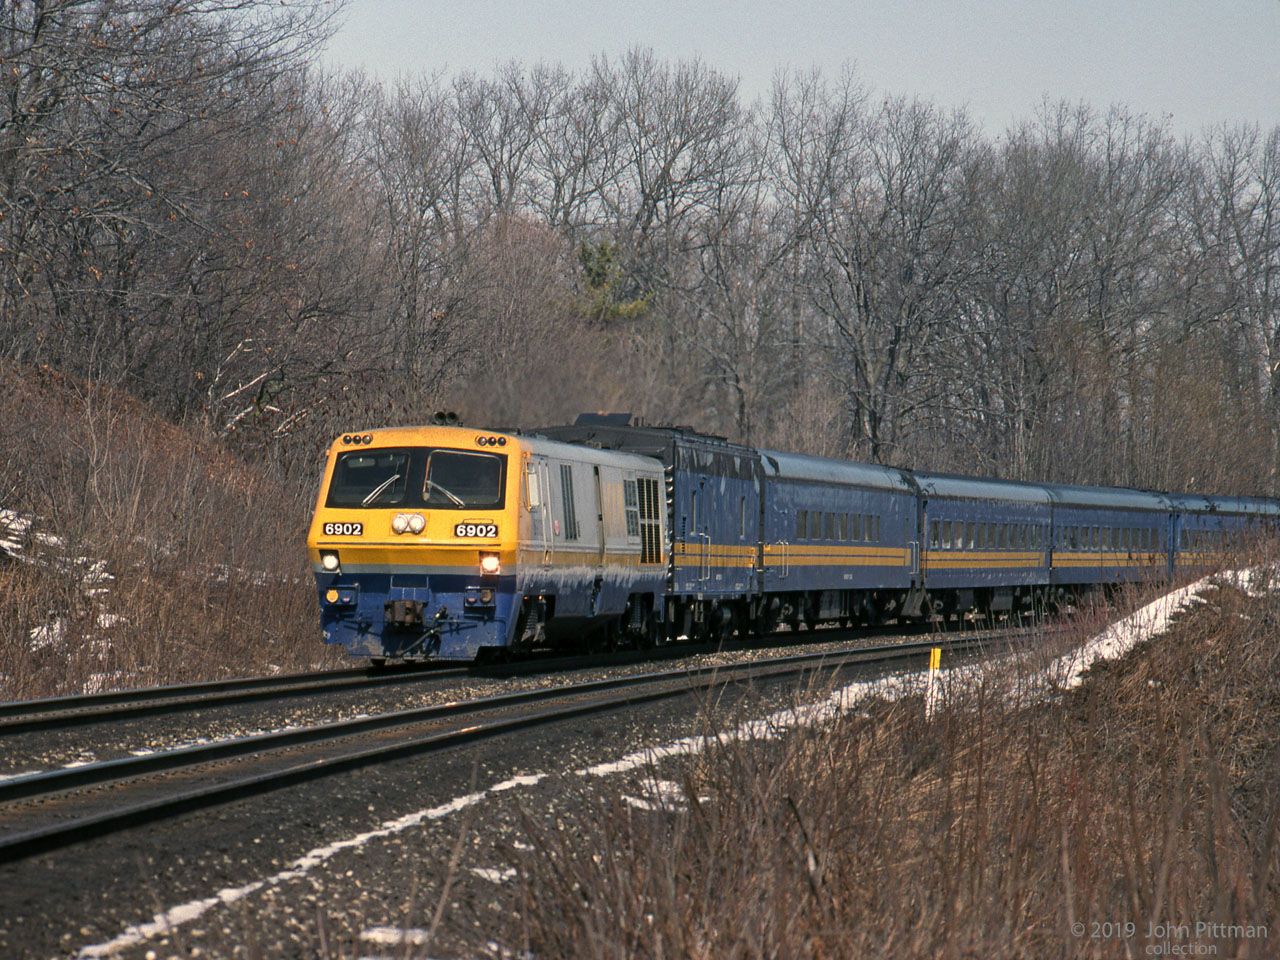 Westbound LRC-2 locomotive VIA 6902 leads its train of steam generator unit and steam heated coaches on this March 1990 morning. This was 2 years before the entire LRC coach fleet was taken out of service for wheelset replacement. 
A few tenths of a mile ahead the train will cross the Burlington/Hamilton boundary and switch onto CN Dundas Sub at CN Bayview en route to Windsor.